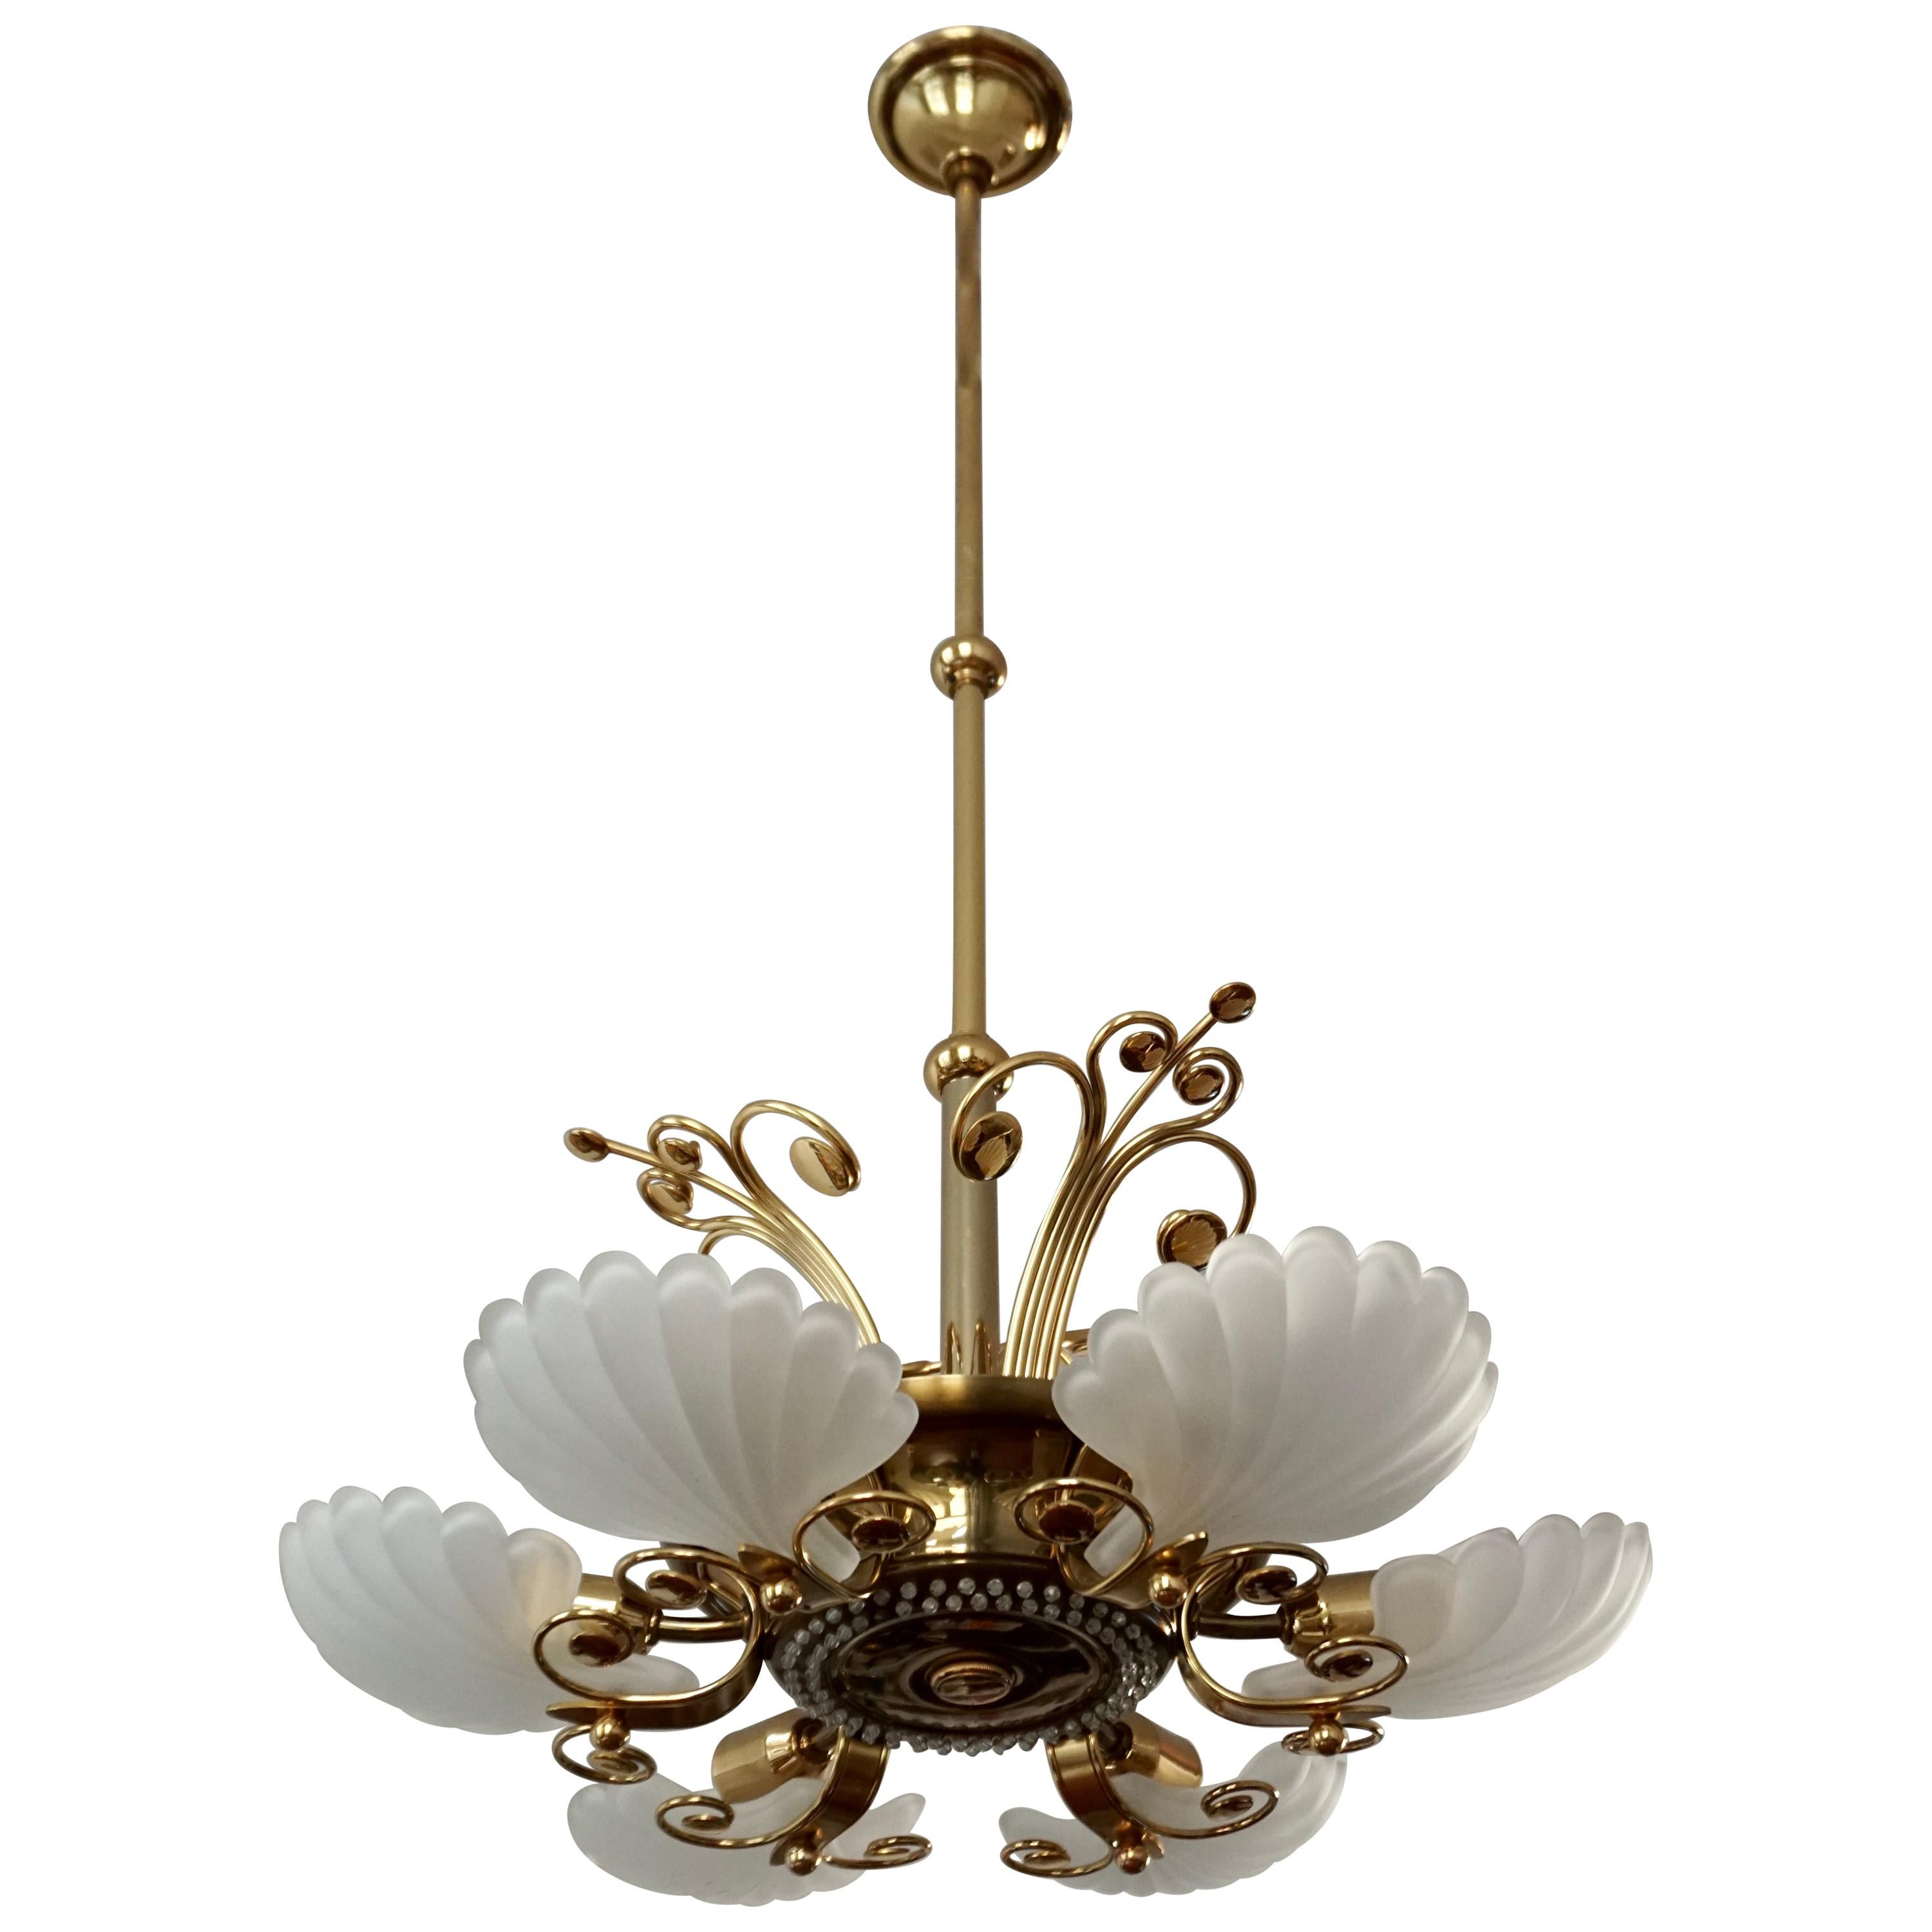 Italian Chandelier in Brass with Murano Glass Shells, 1970s For Sale